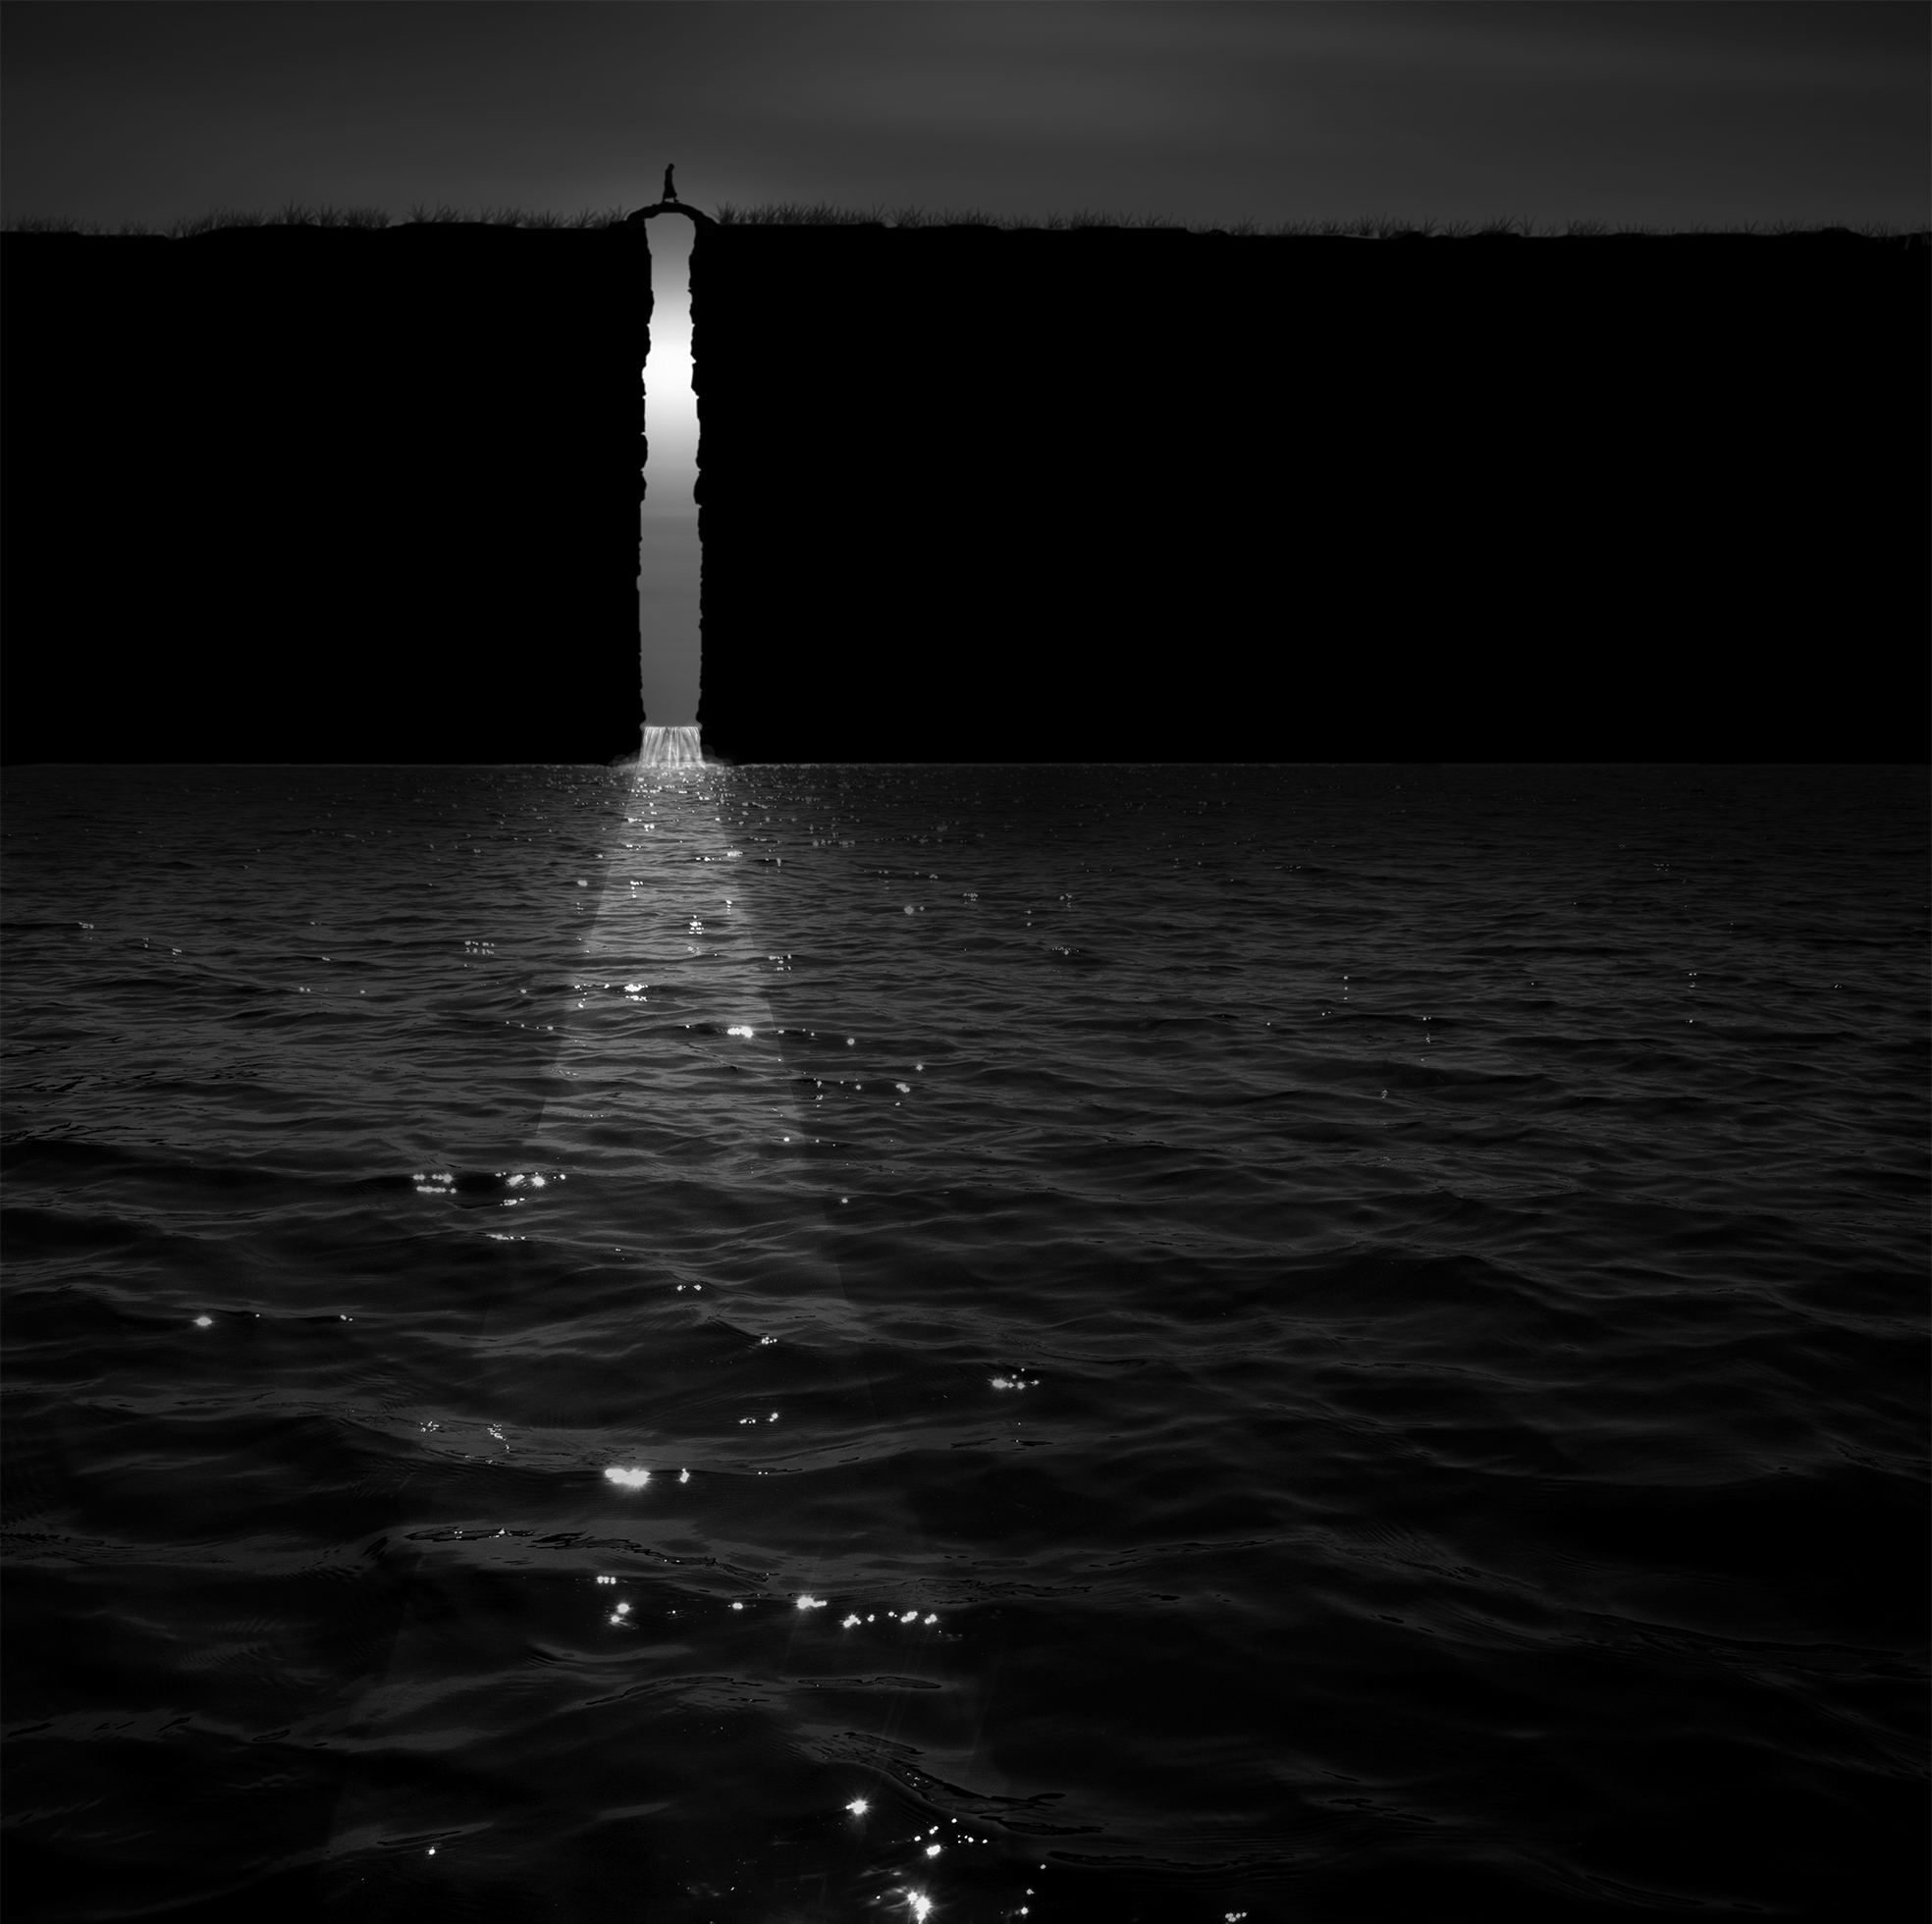 “The Moon Pours In”: A lone figure walks over a bridge in the moonlight. A body of water with a high wall has a small opening that light pours through. The bridge, a half circle above the narrow opening, has a tiny figure walking atop it.